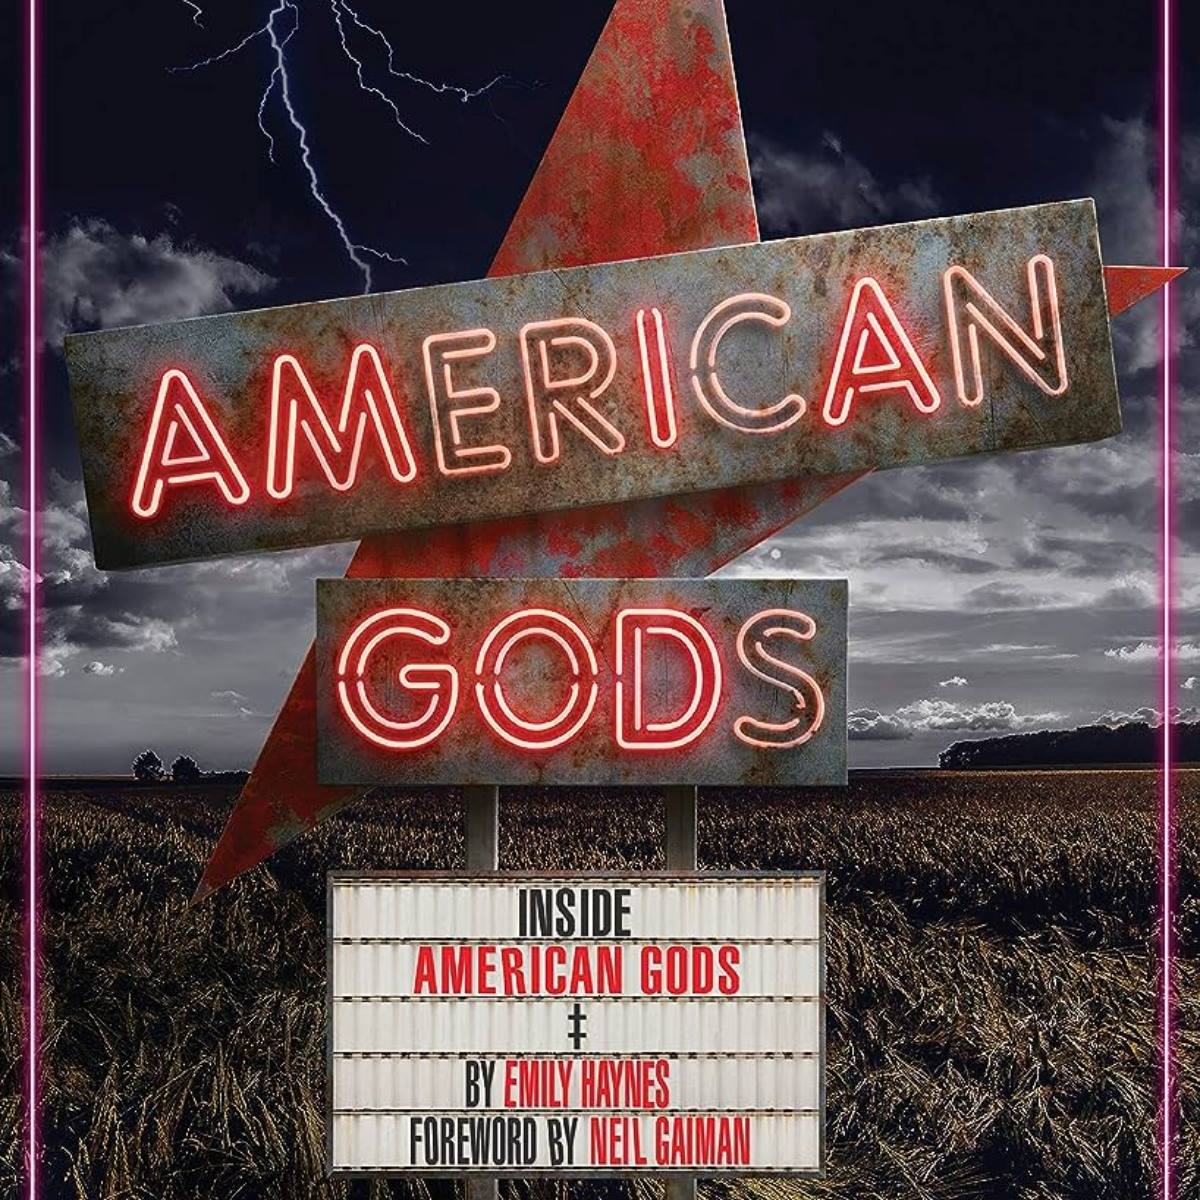 15-superior-american-gods-on-kindle-for-2023